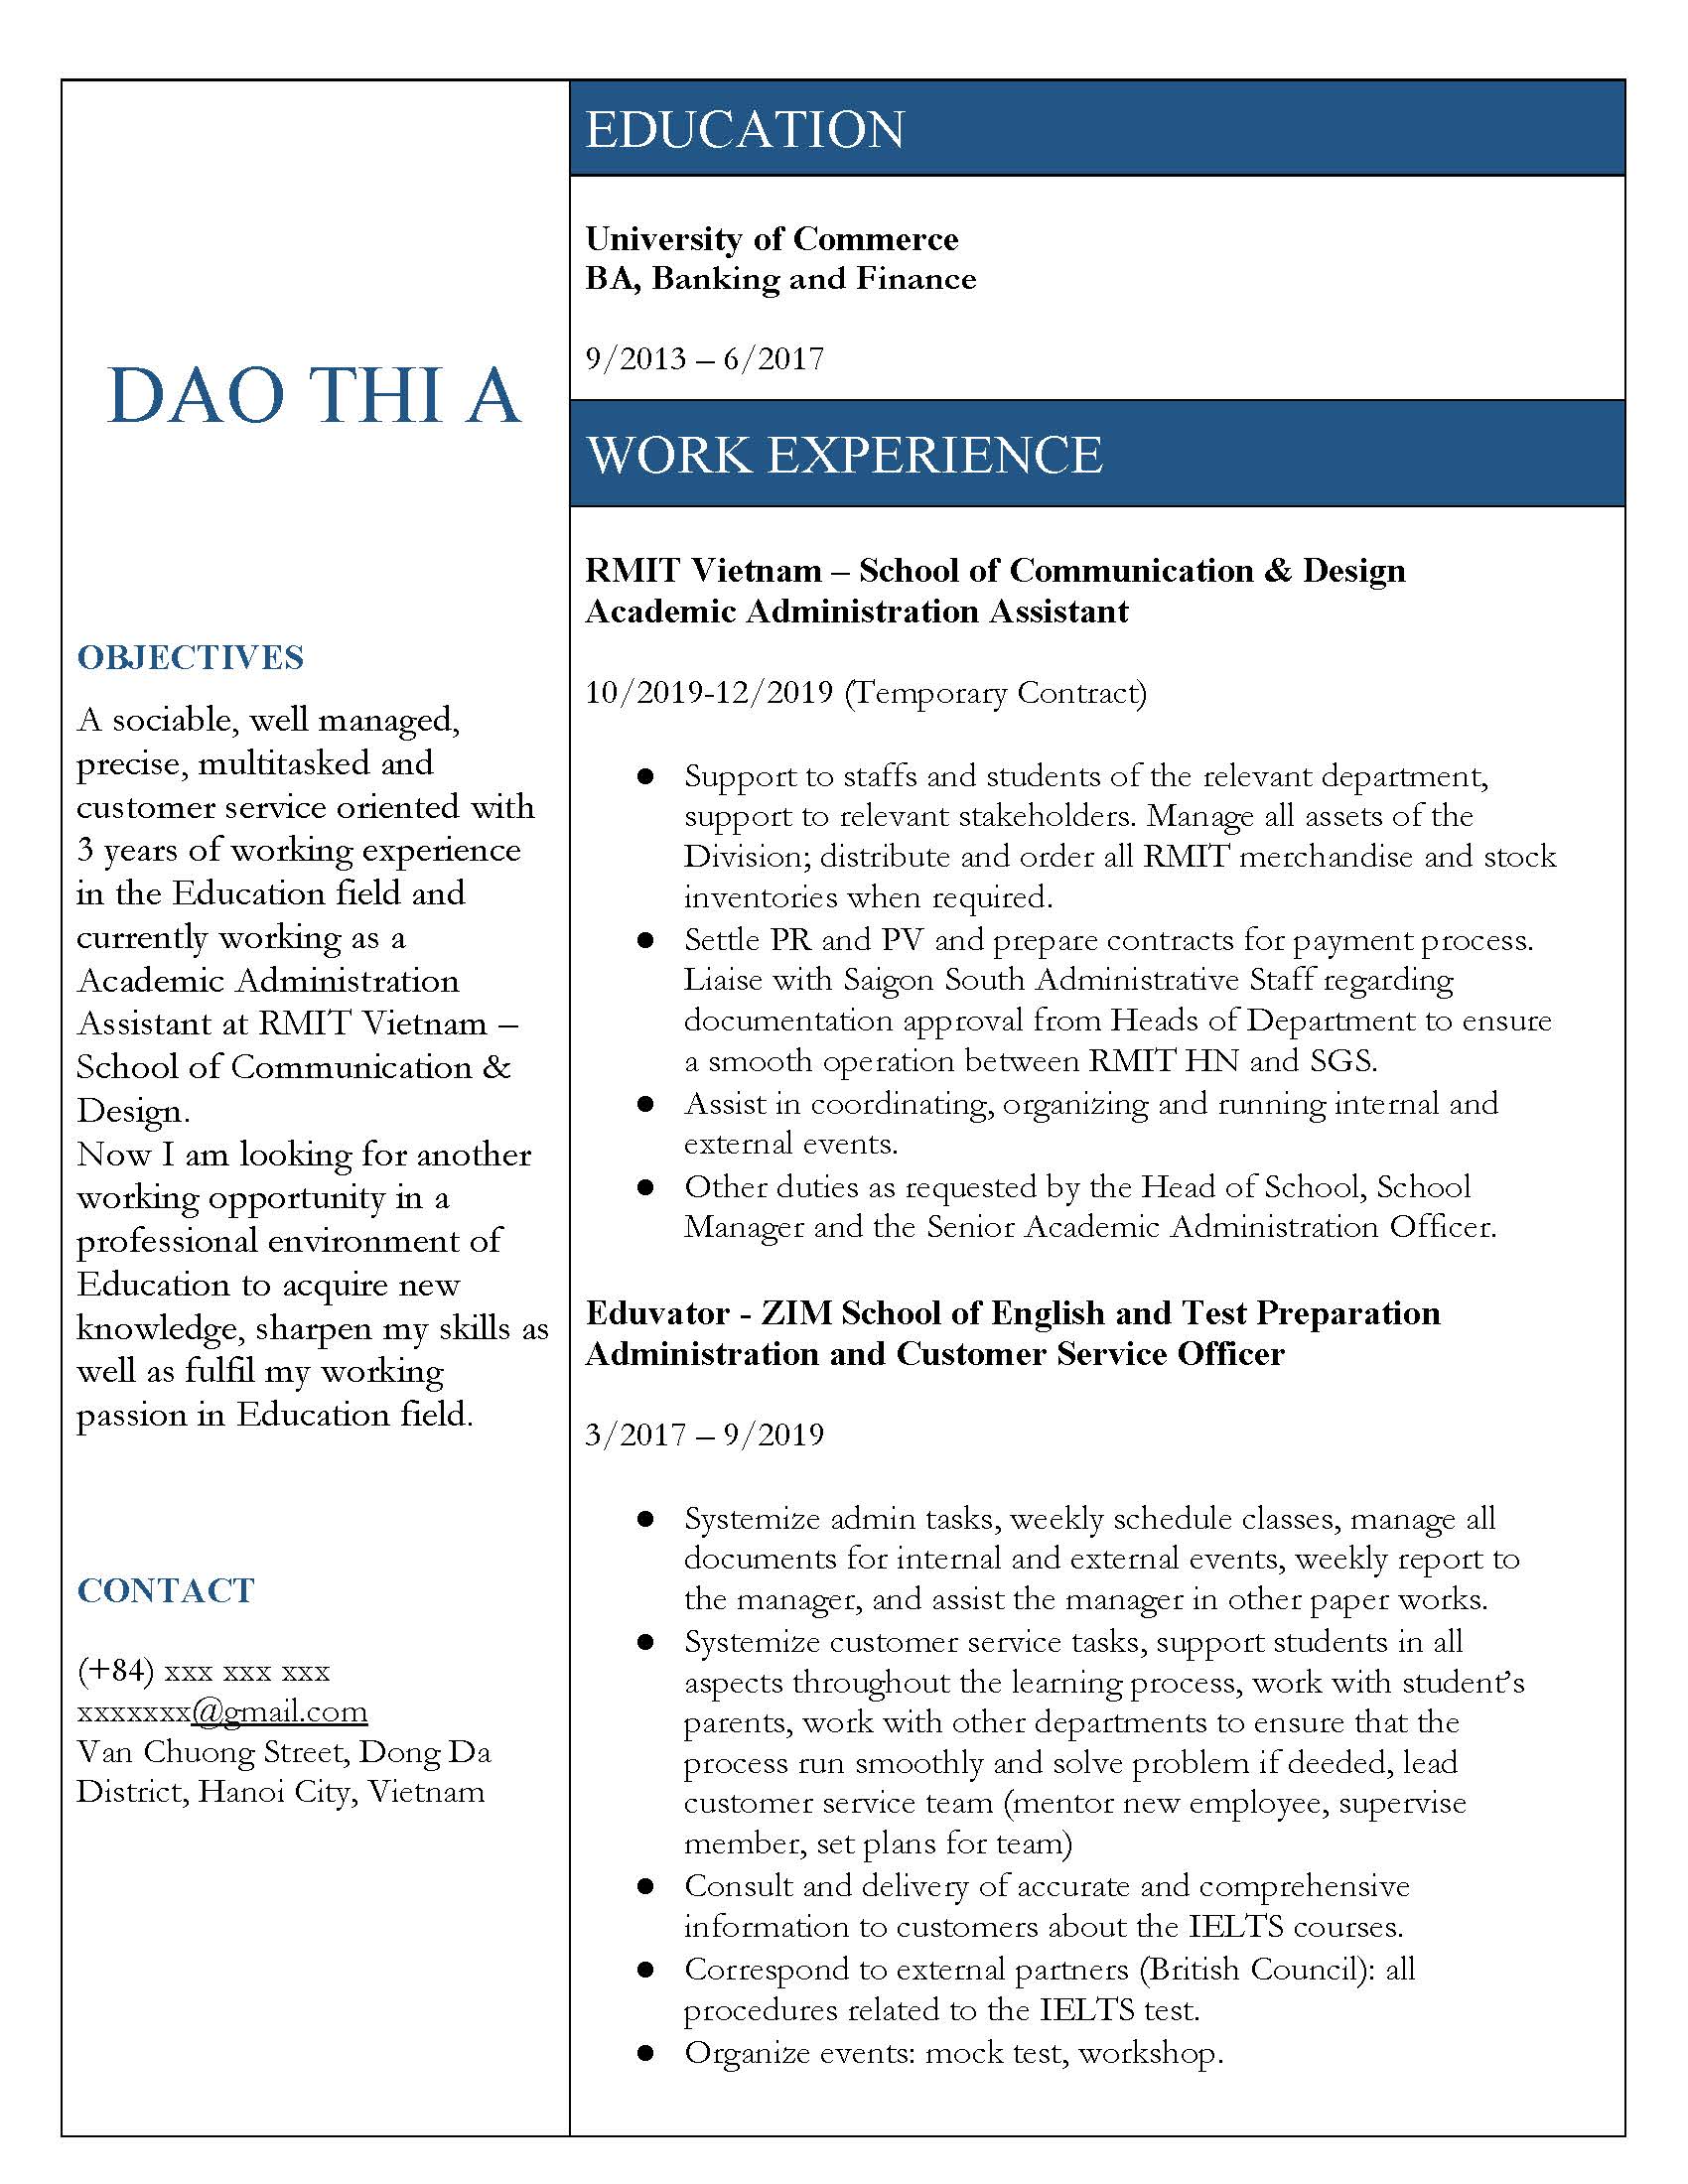 CV_Test day delivery officer_Dao Thi A_Page_1